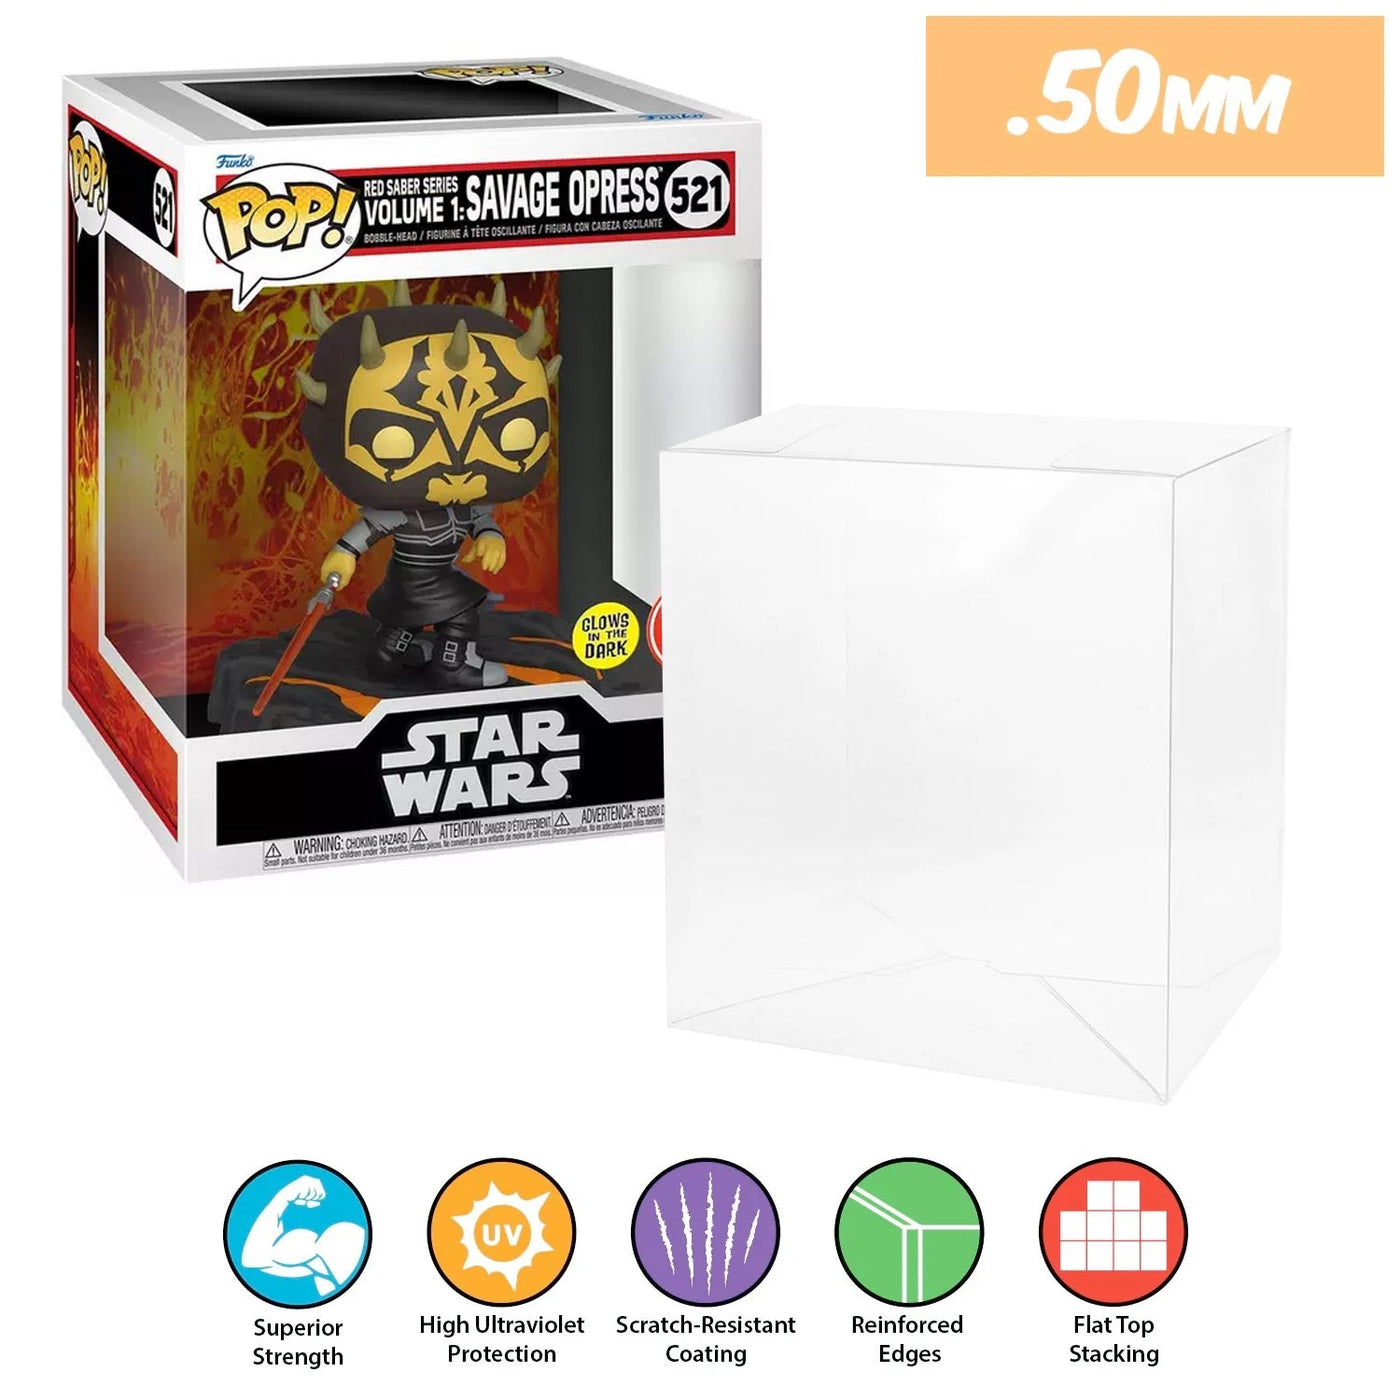 star wars red saber series savage opress pop deluxe best funko pop protectors thick strong uv scratch flat top stack vinyl display geek plastic shield vaulted eco armor fits collect protect display case kollector protector